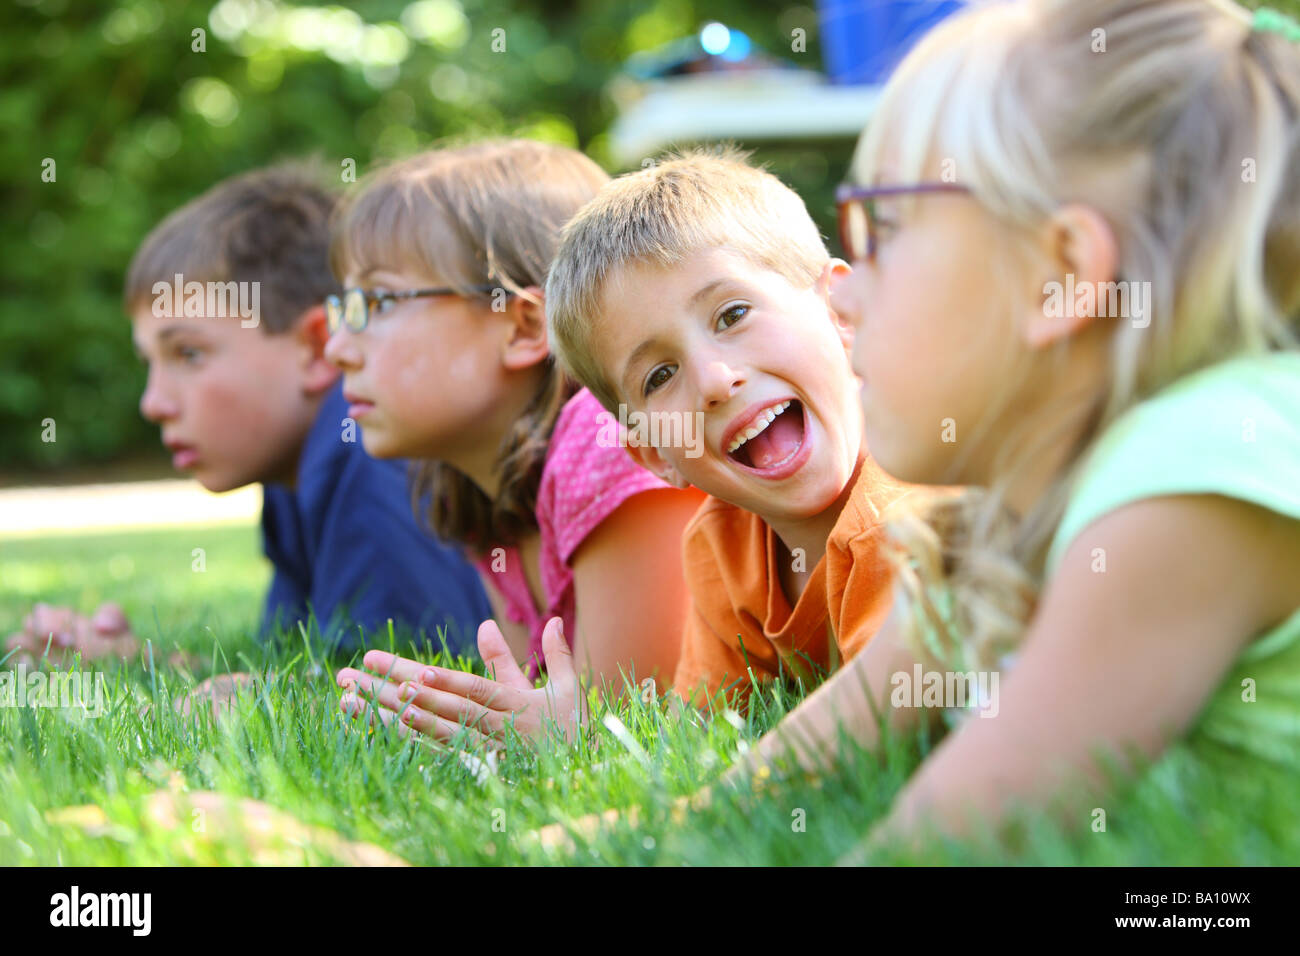 Group of children laying in grass, one boy looks at camera Stock Photo